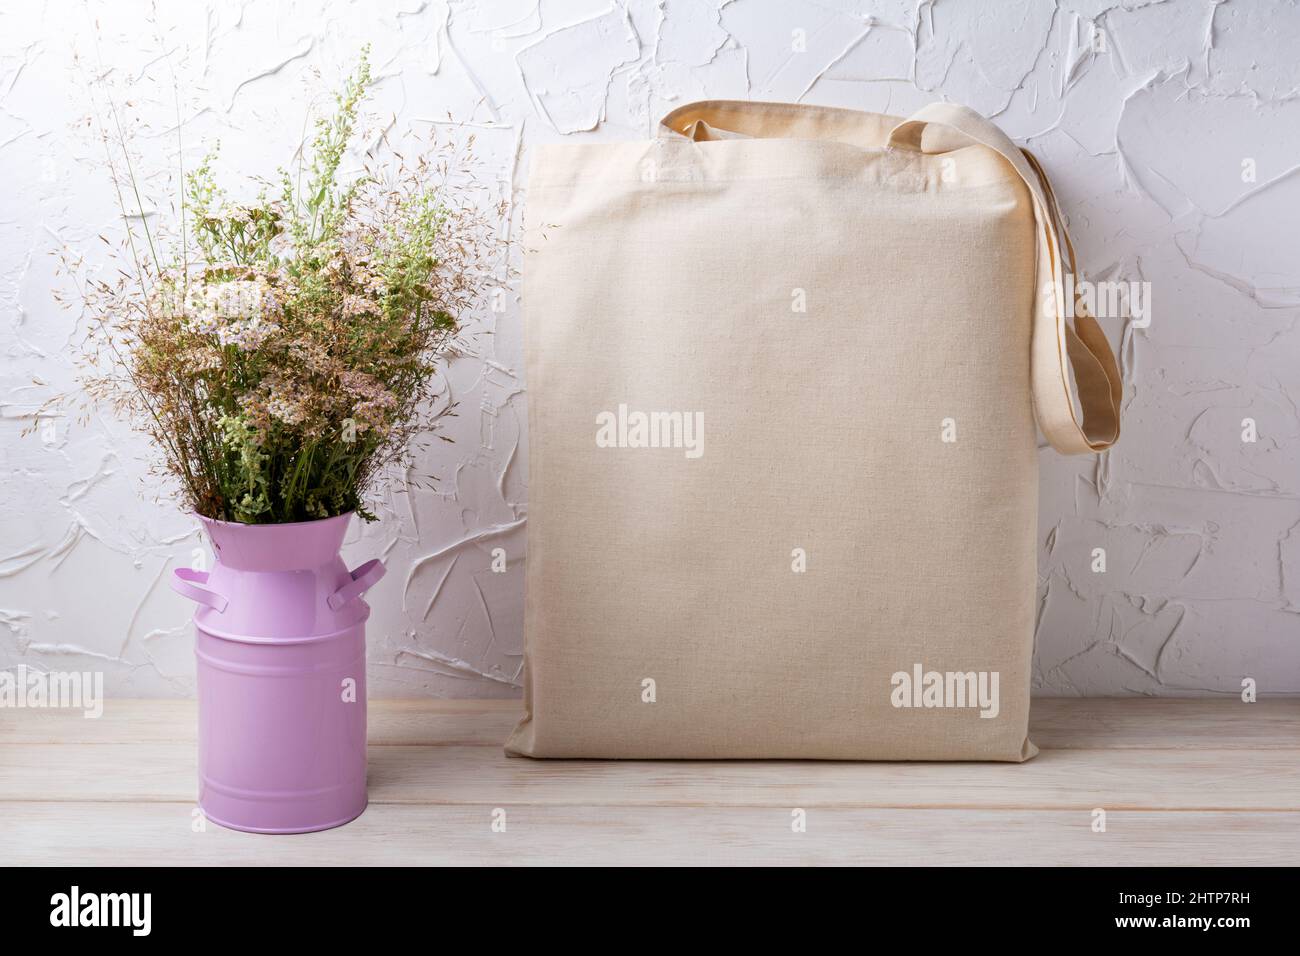 Canvas tote bag mockup with wild flowers and grass in the pink can. Rustic linen shopper bag mock up for branding presentation Stock Photo